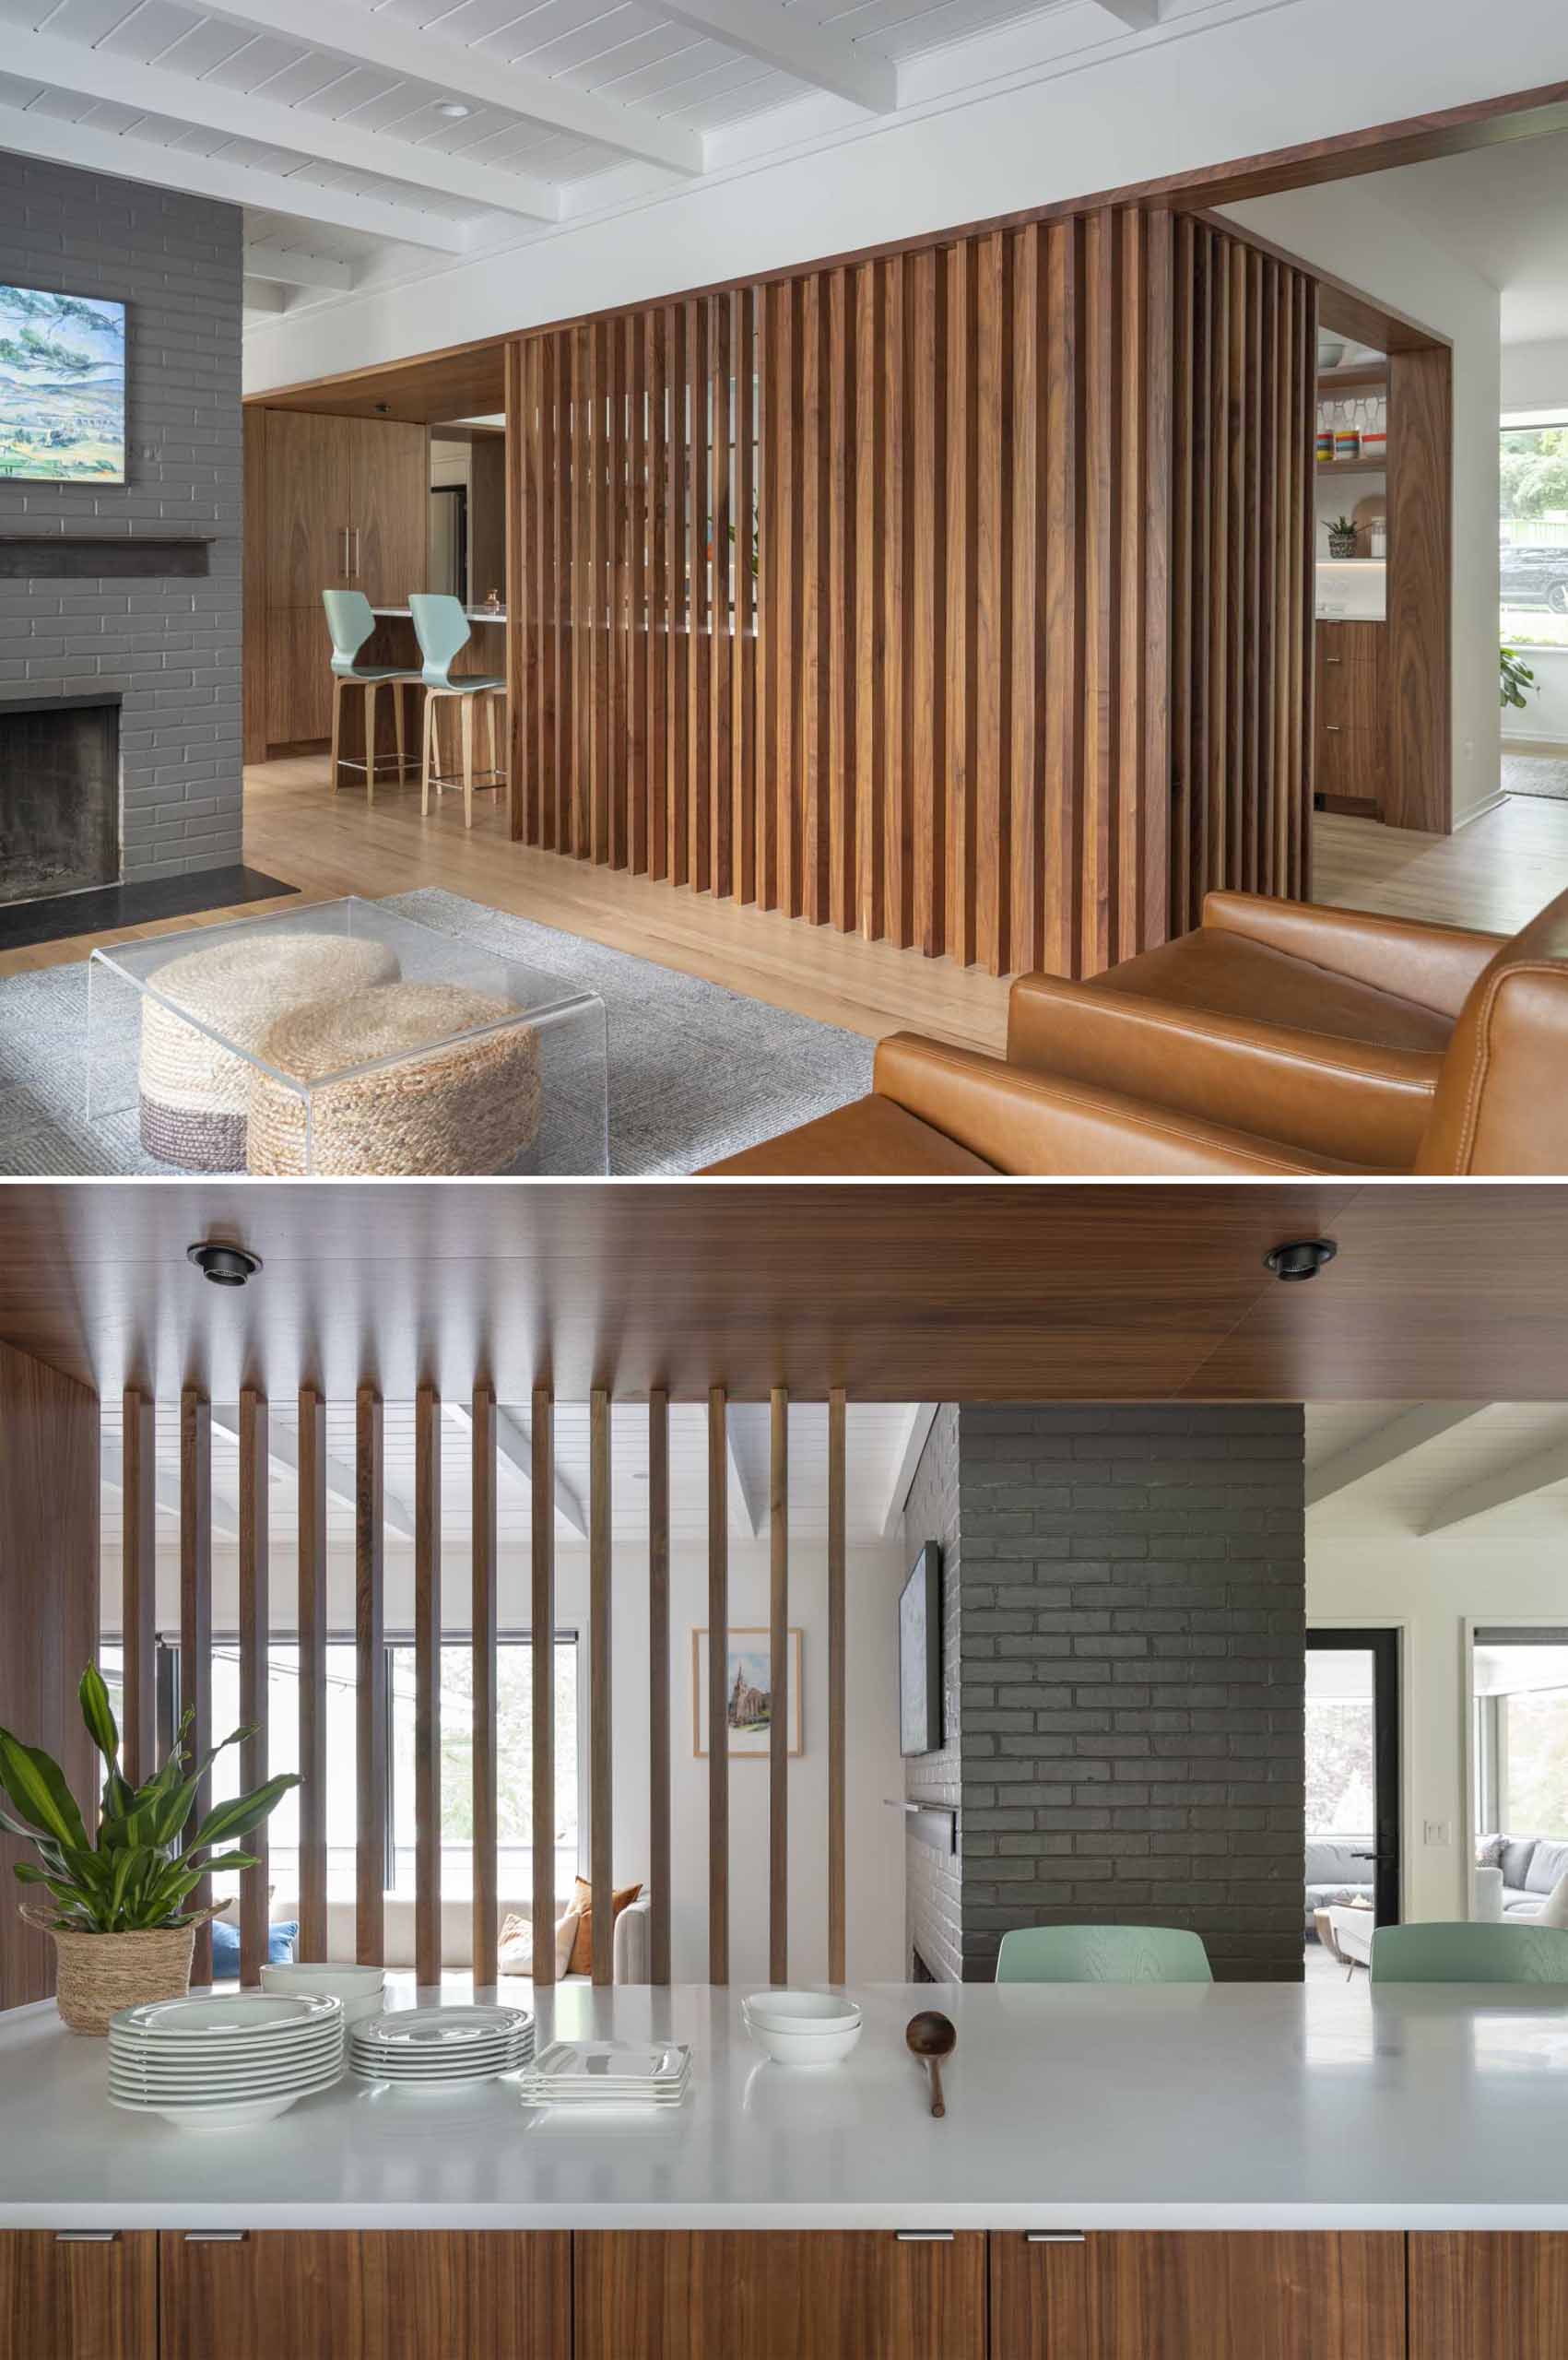 A wood slat accent wall helps to define the kitchen, keeping it partially hidden from view, but allowing the light to travel throughout the spaces.